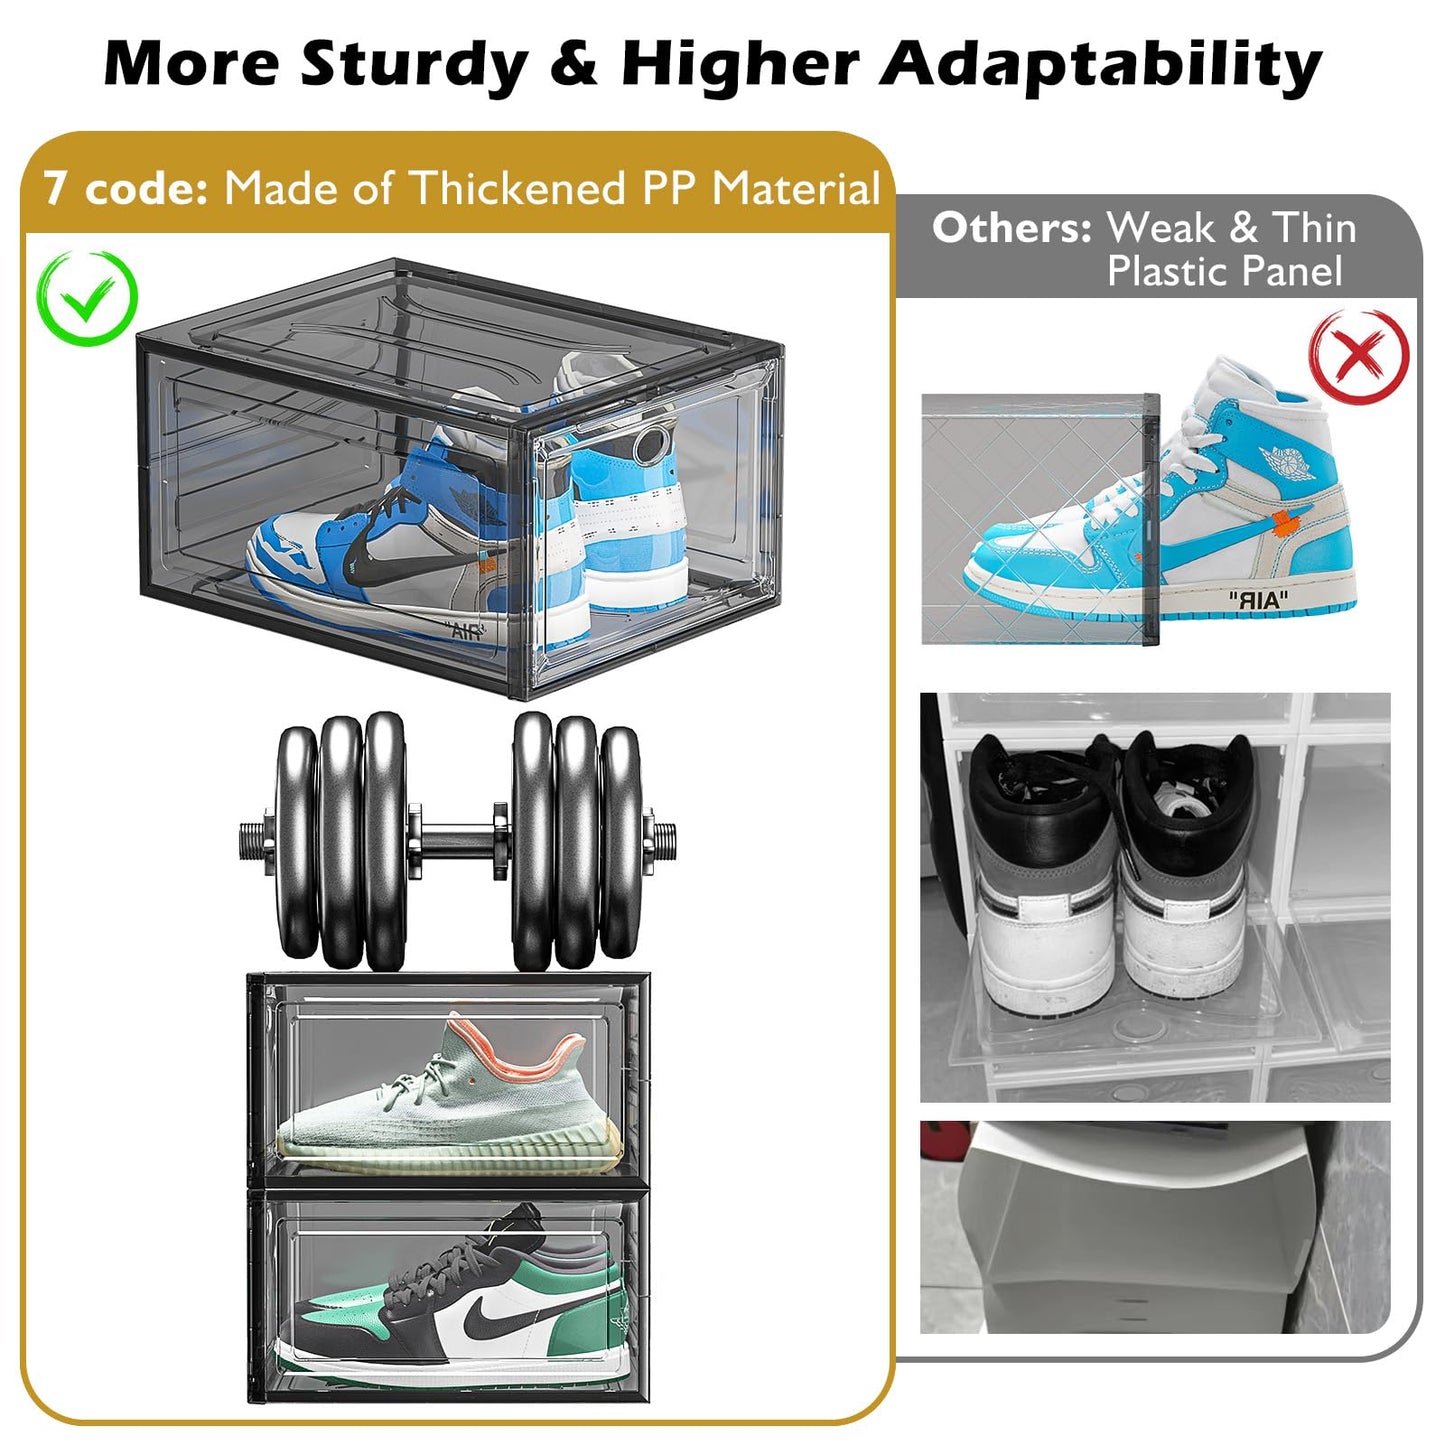 Large Clear Shoe Boxes Organizer【Thicker Material】Stronger Shoe Box with Magnetic Door, Stackable Shoe Storage Box for Closet, Foldable Space-Saving Storage Bins, Transparent and Black 【9-Pack】